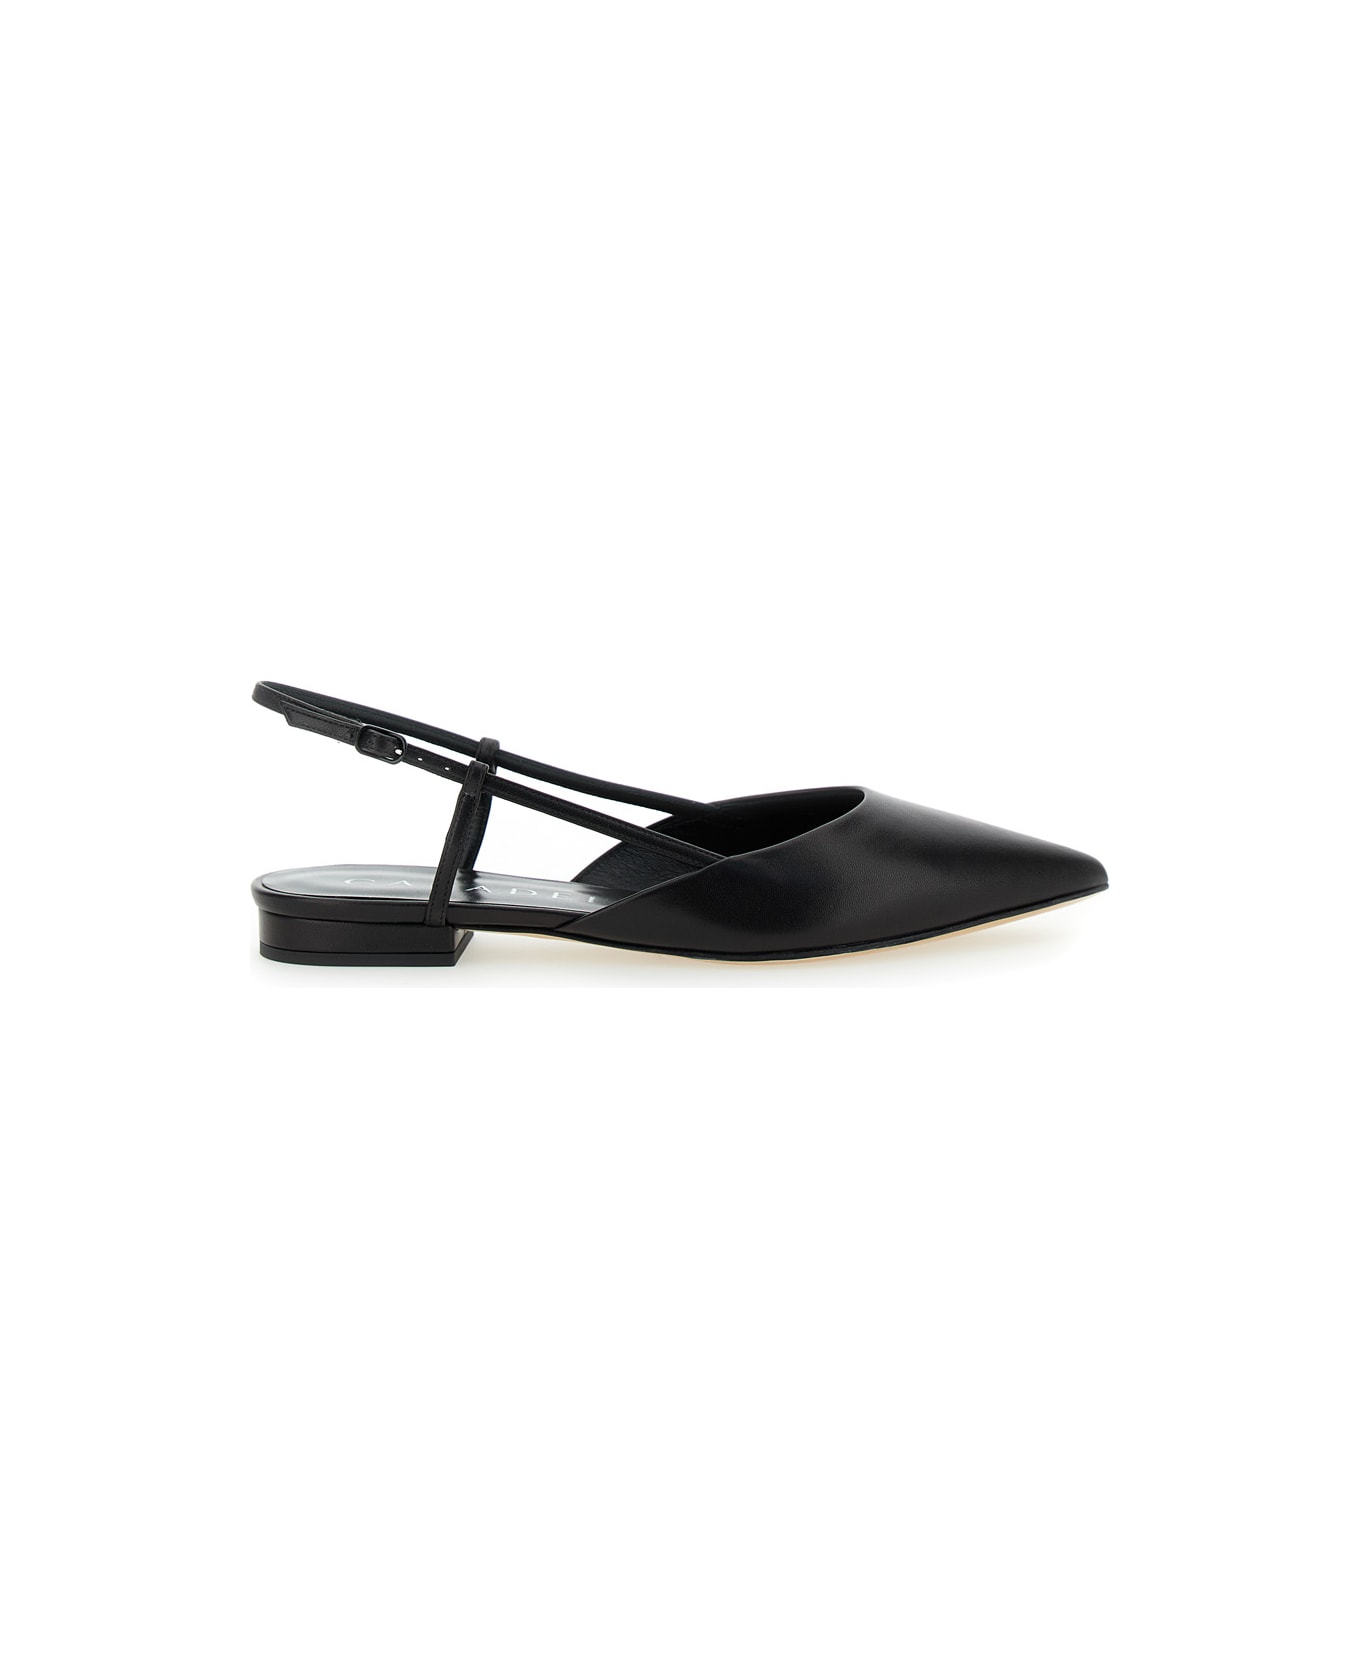 Casadei Black Slingback With Straps In Leather Woman - Black フラットシューズ